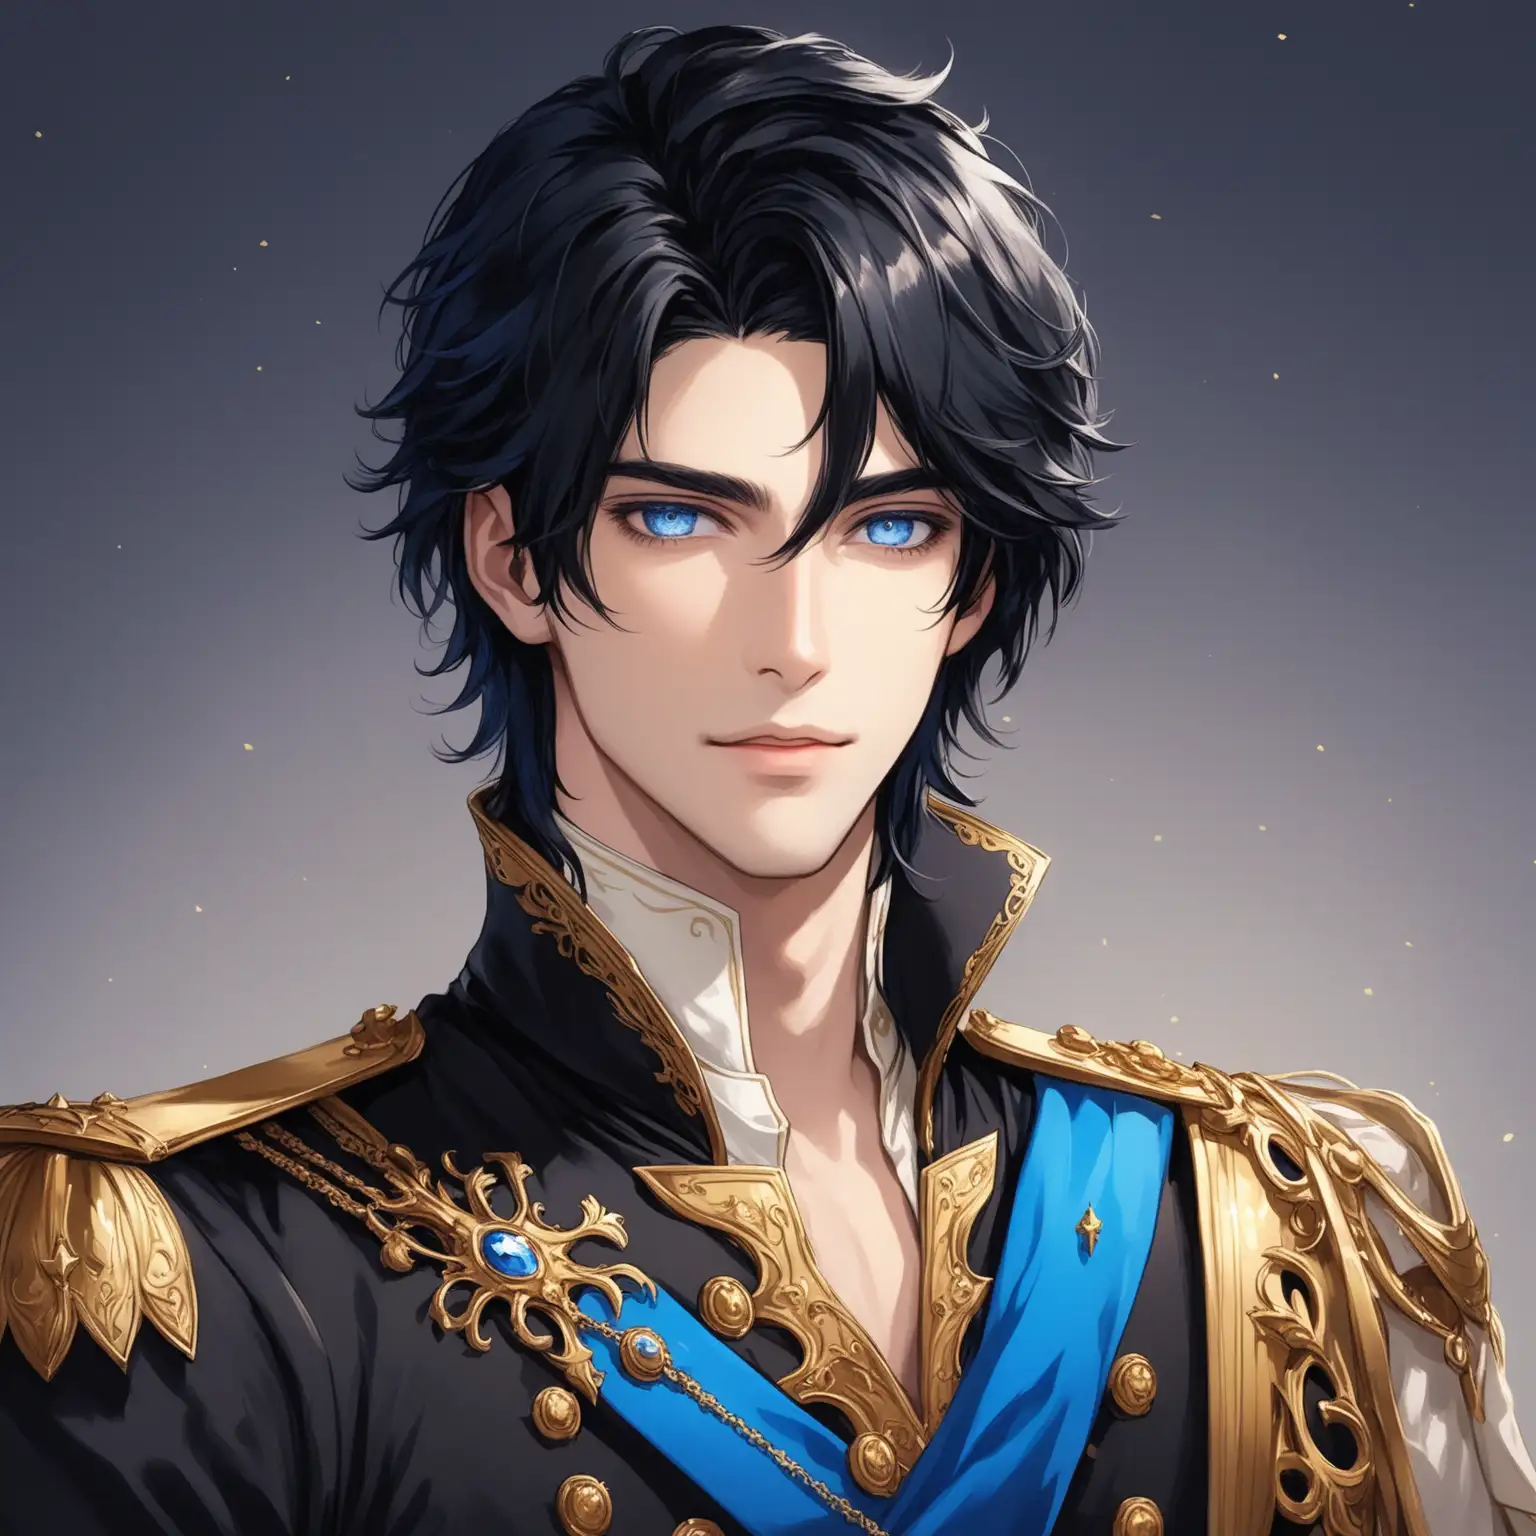 Handsome prince with black hair and blue eyes 